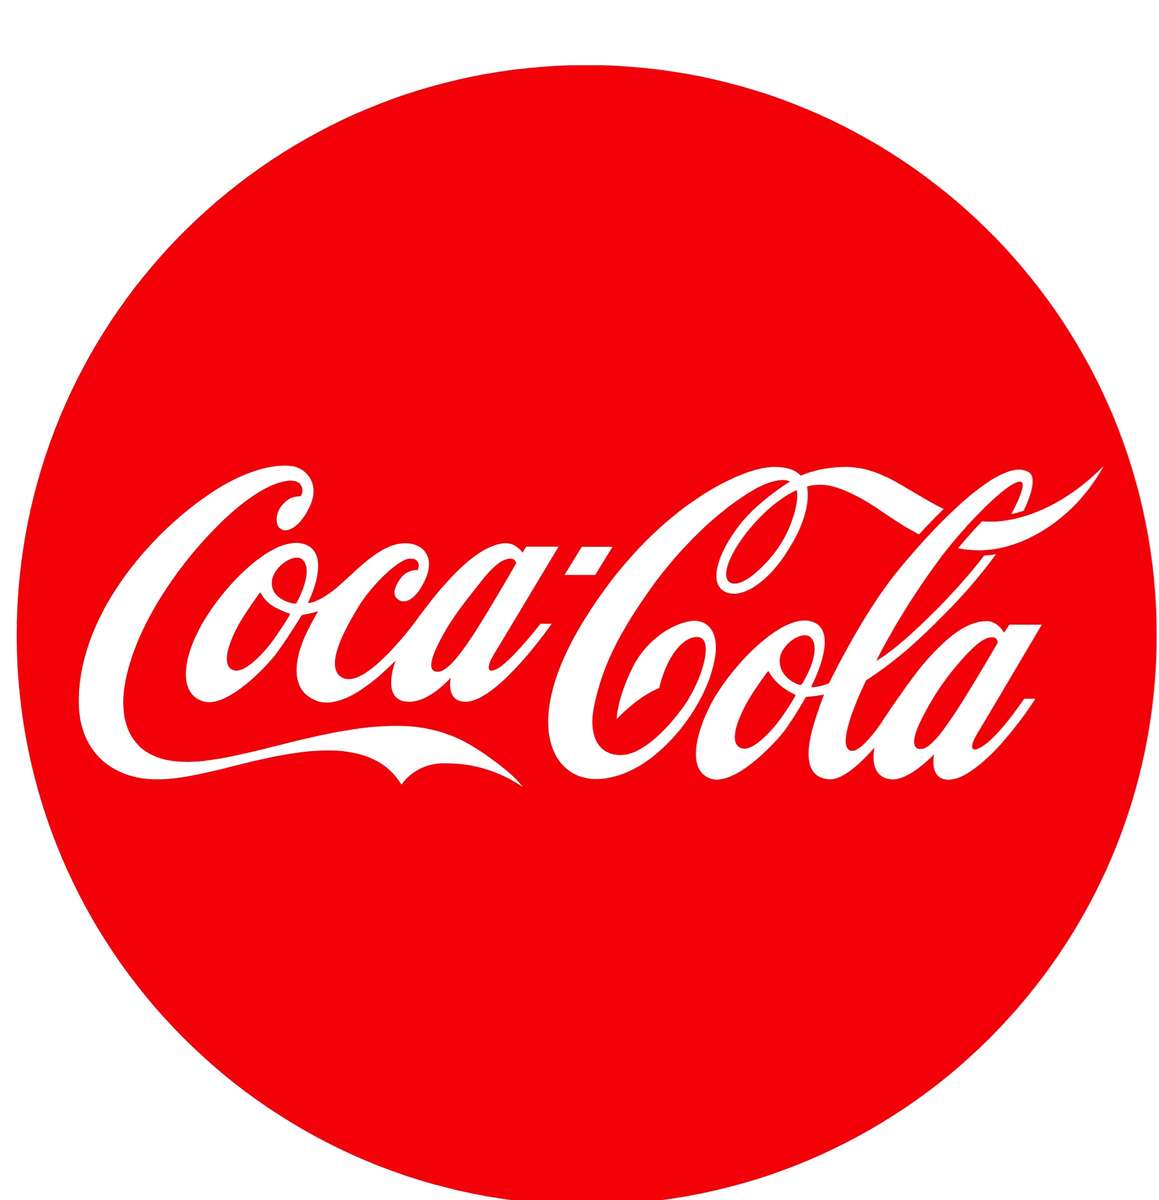 Coca cola is good for health online puzzle